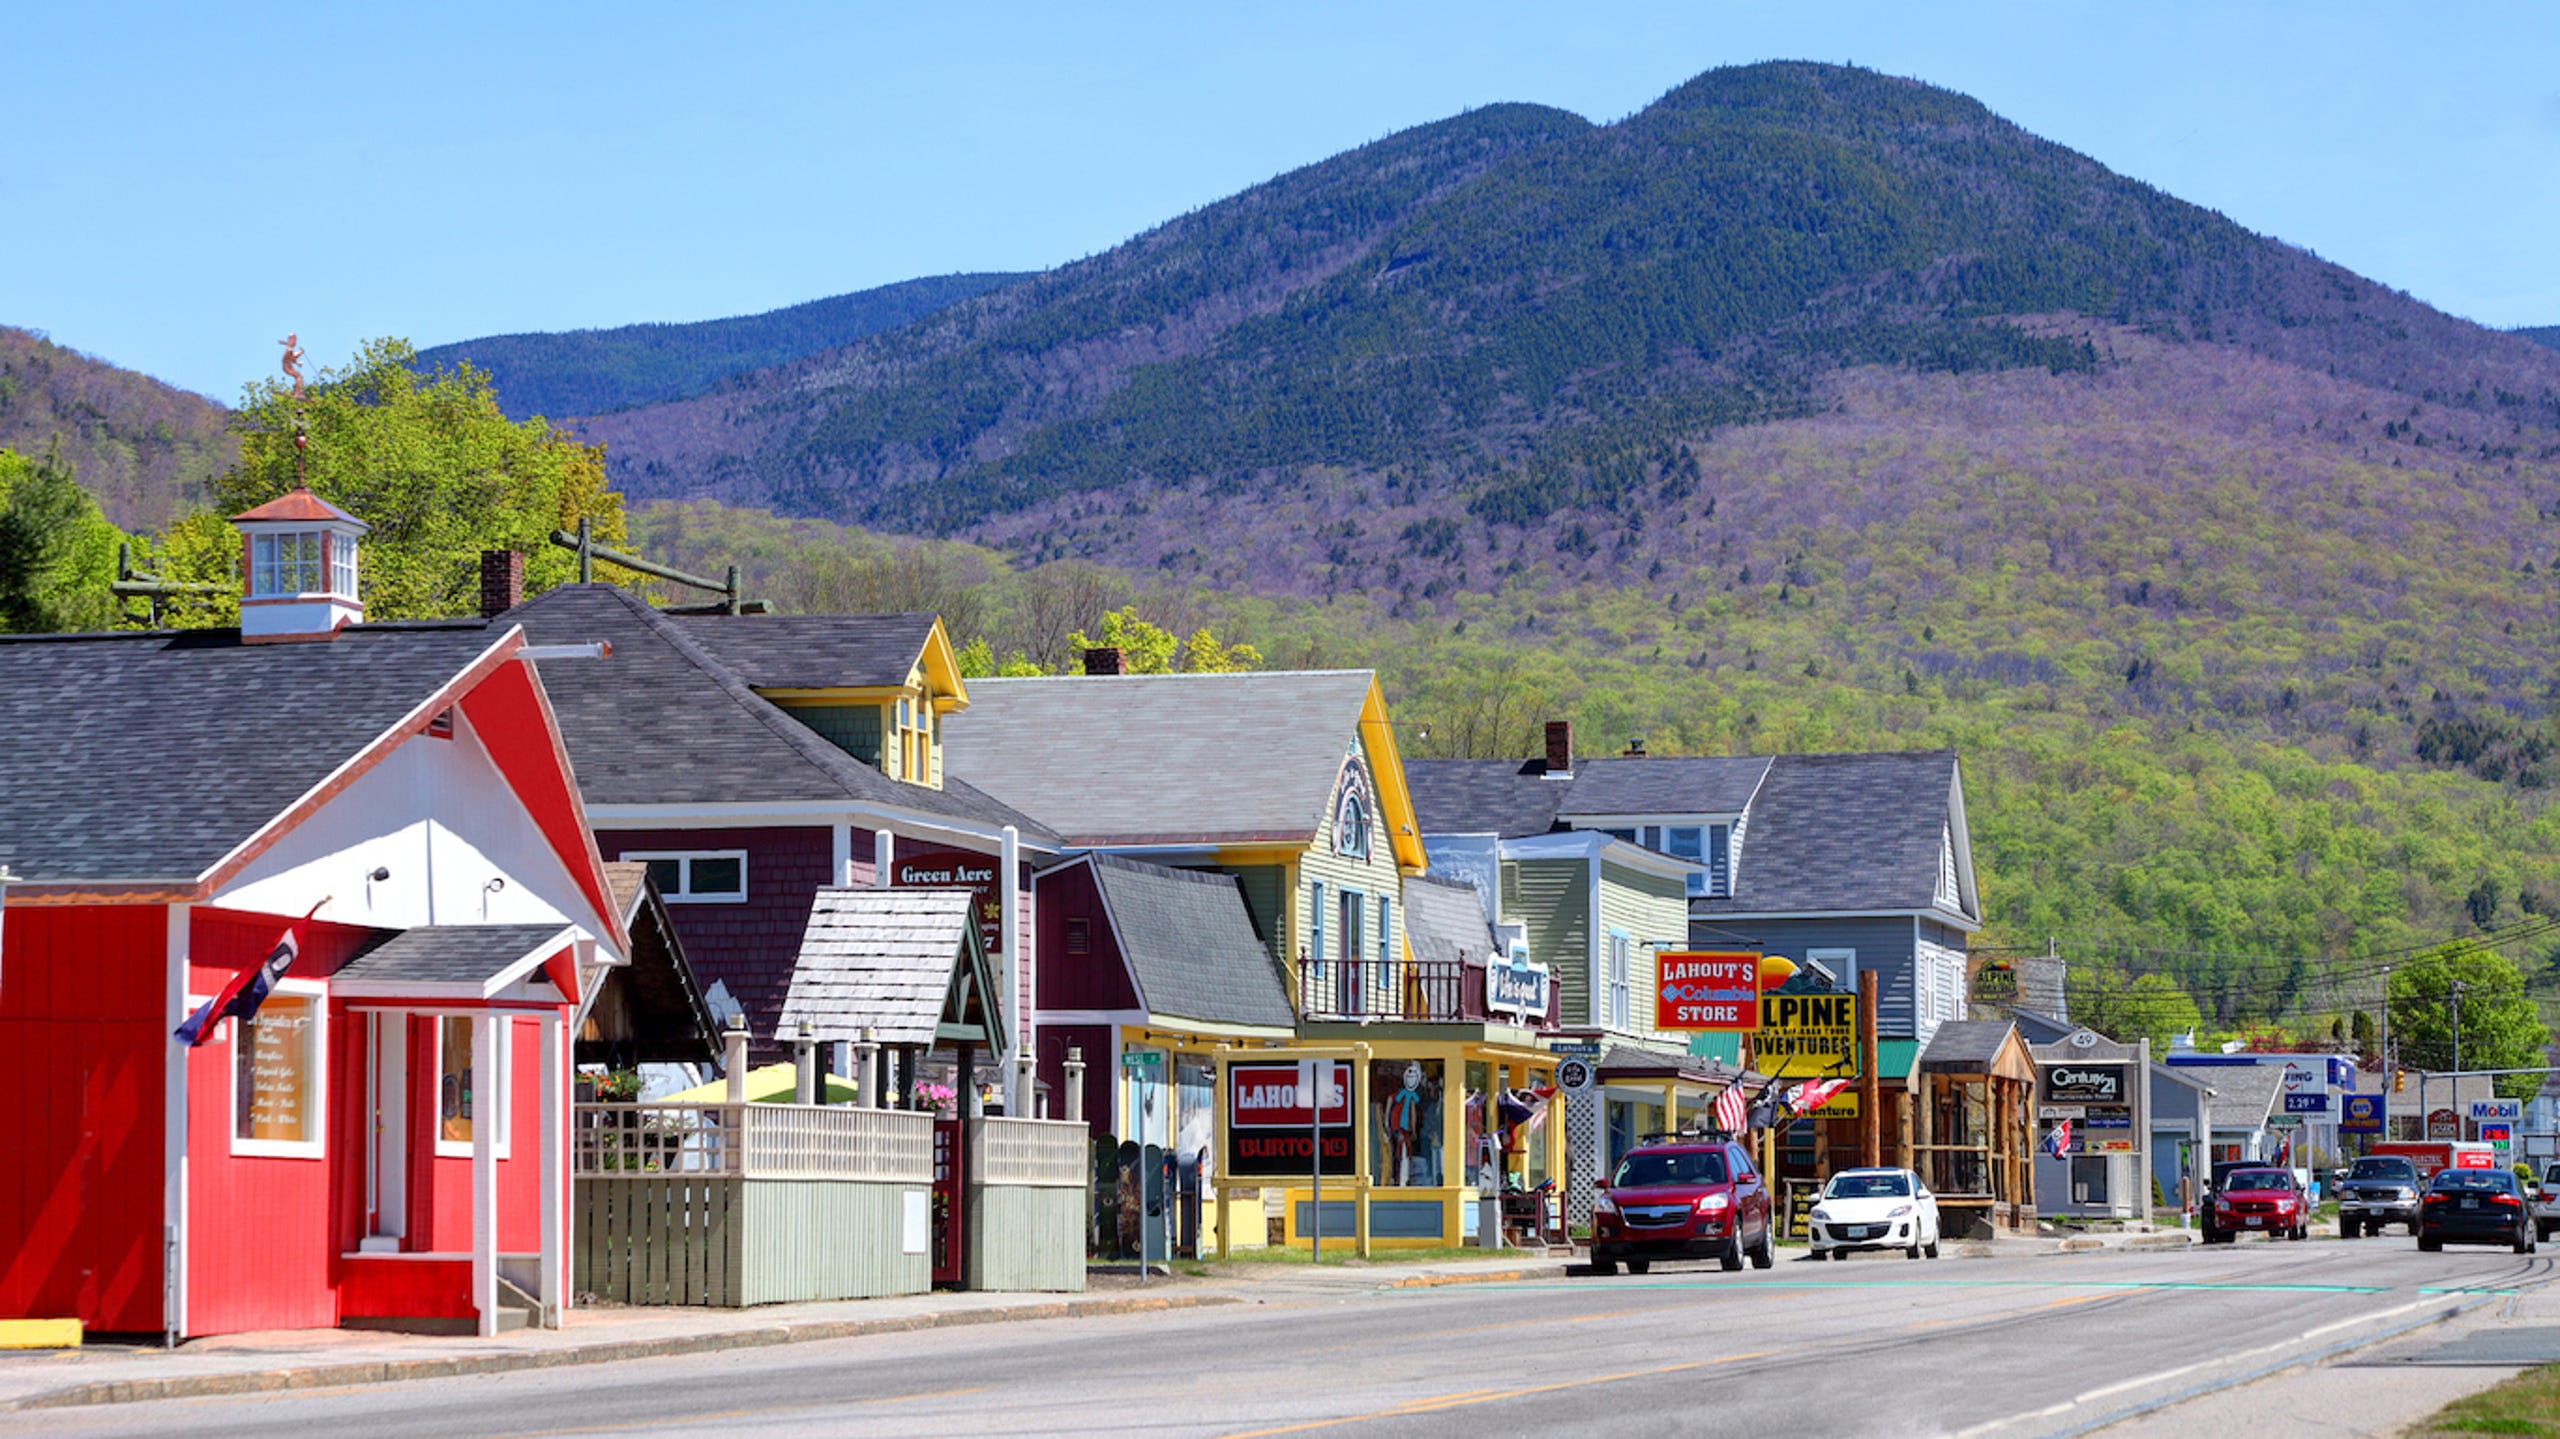 Lincoln, New Hampshire • Franconia Notch State Park is an outdoor destination that will keep you coming back for years. Drive the scenic parkway and stop at the Flume Gorge, a granite crevice full of waterfalls and glacial boulders, or canoe on Echo Lake. Take an aerial tramway ride to the top of Cannon Mountain, or gaze into the Basin.